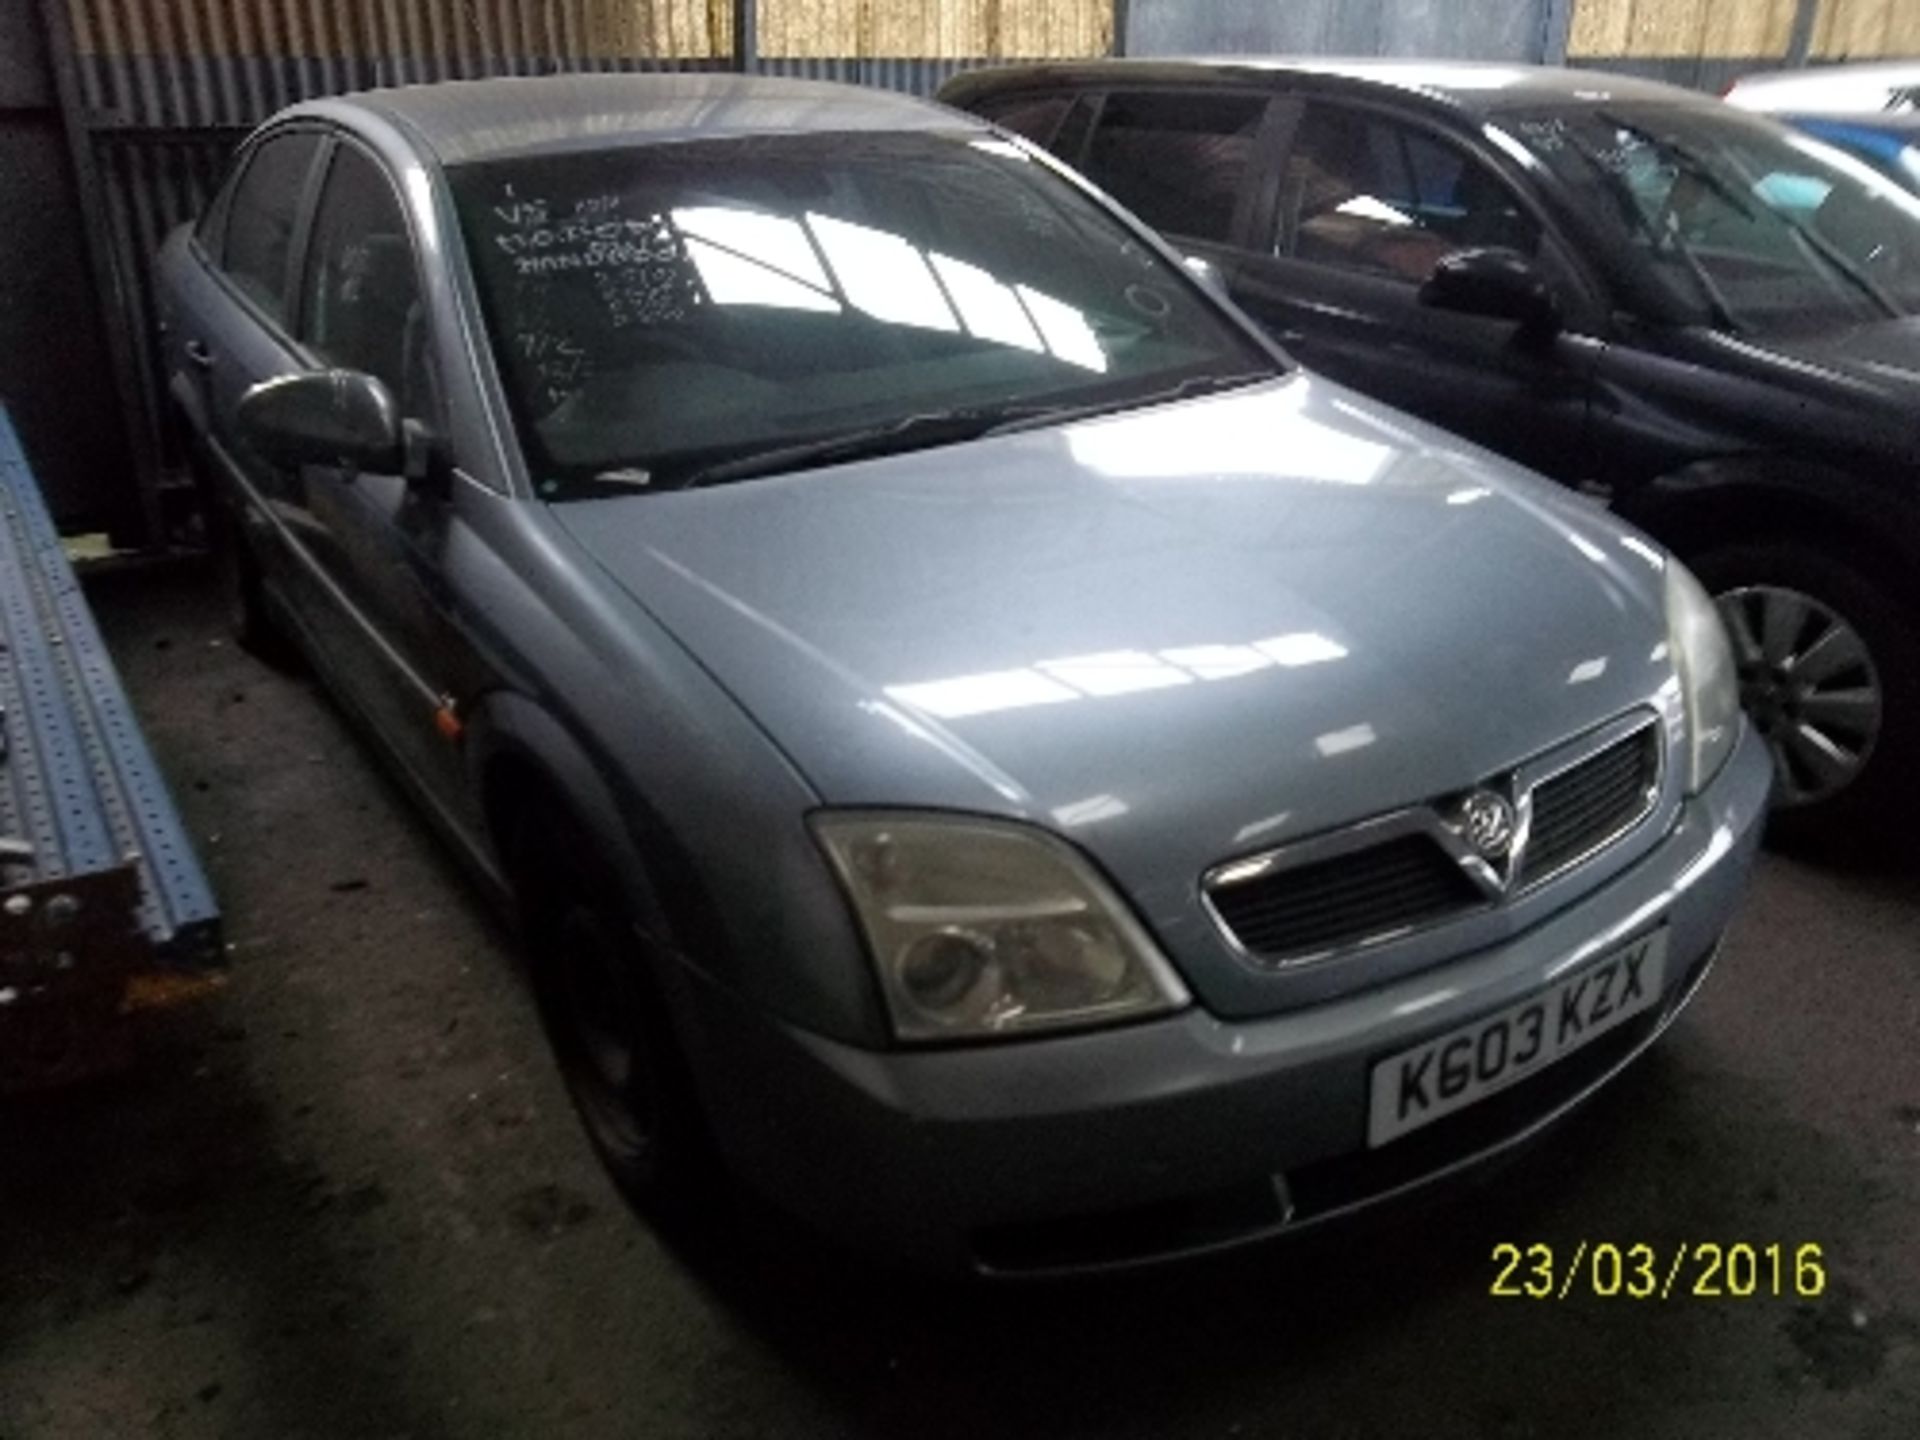 Vauxhall Vectra LS 16V - KG03 KZX Date of registration: 13.05.2003 1796cc, petrol, manual, silver - Image 2 of 4